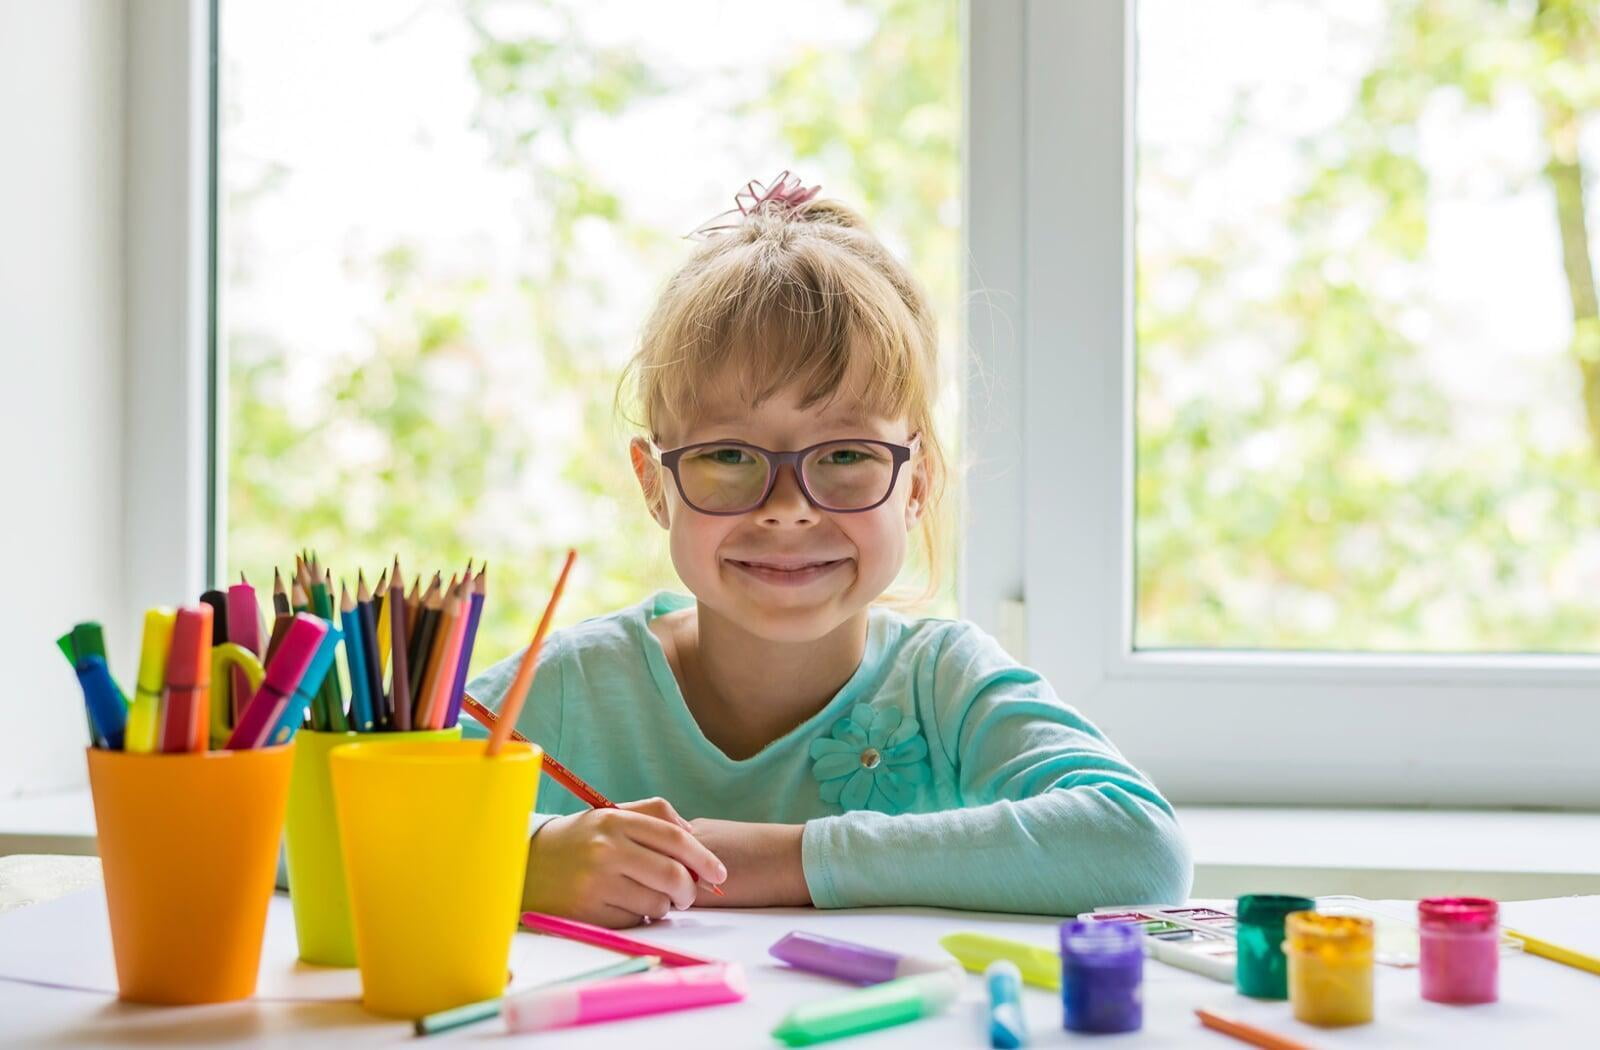 Why choose Begin Bright School Readiness classes for your child?